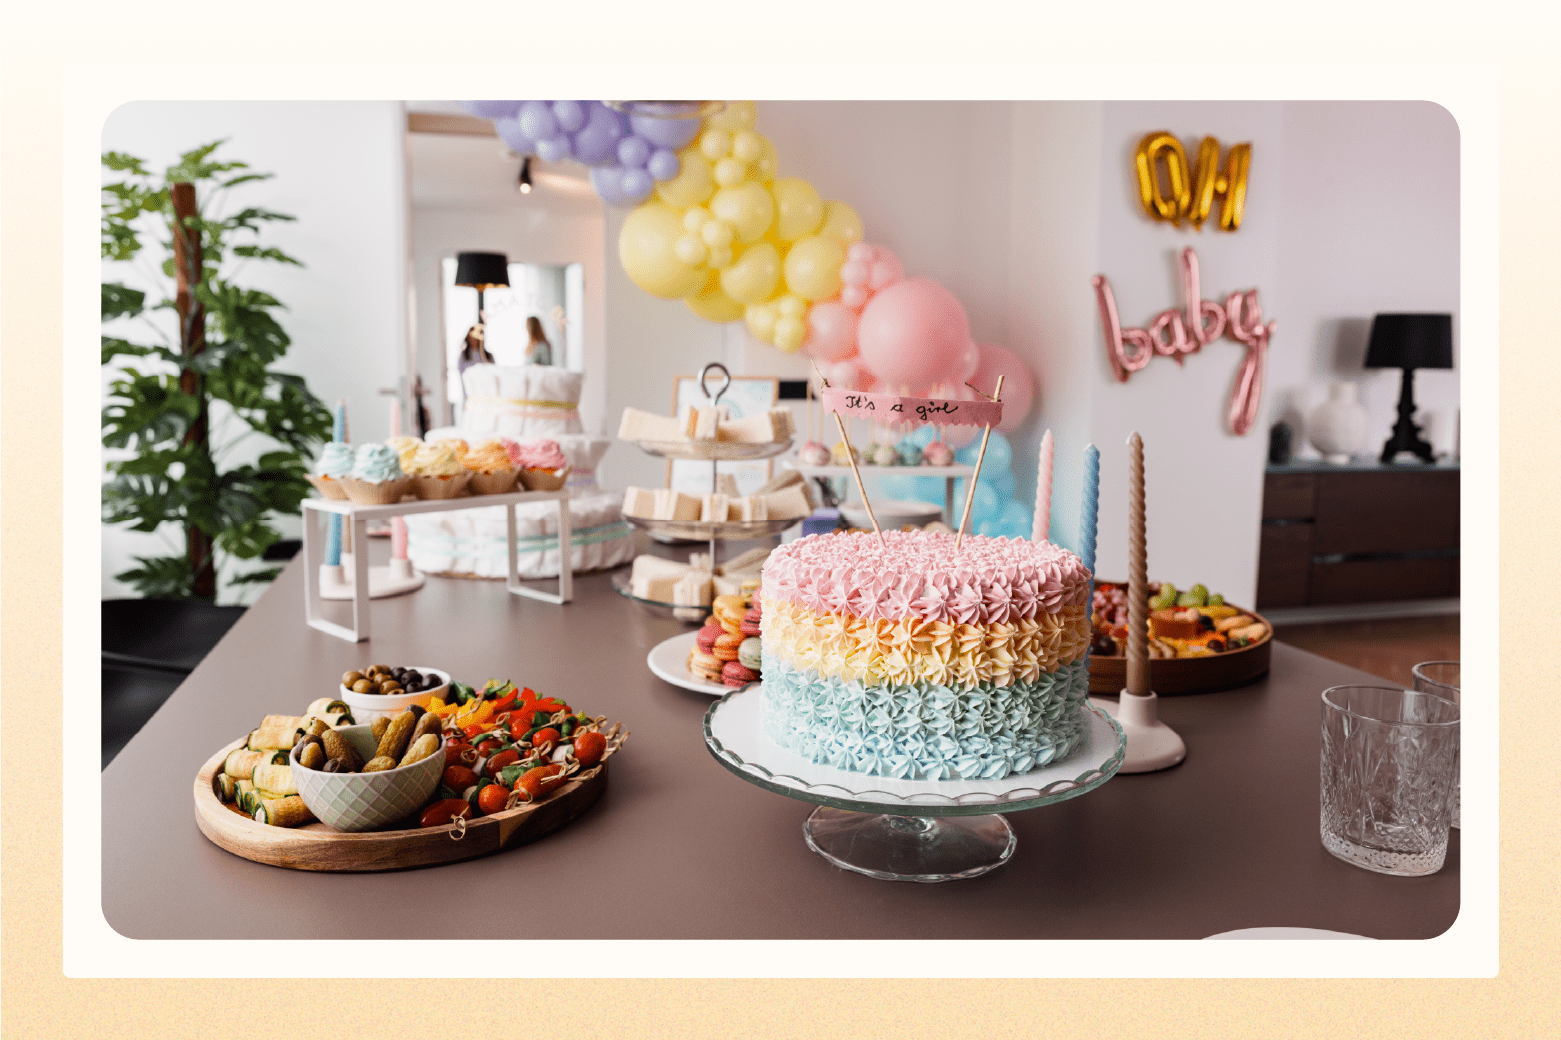 Baby sprinkle table with rainbow cake and balloons in background